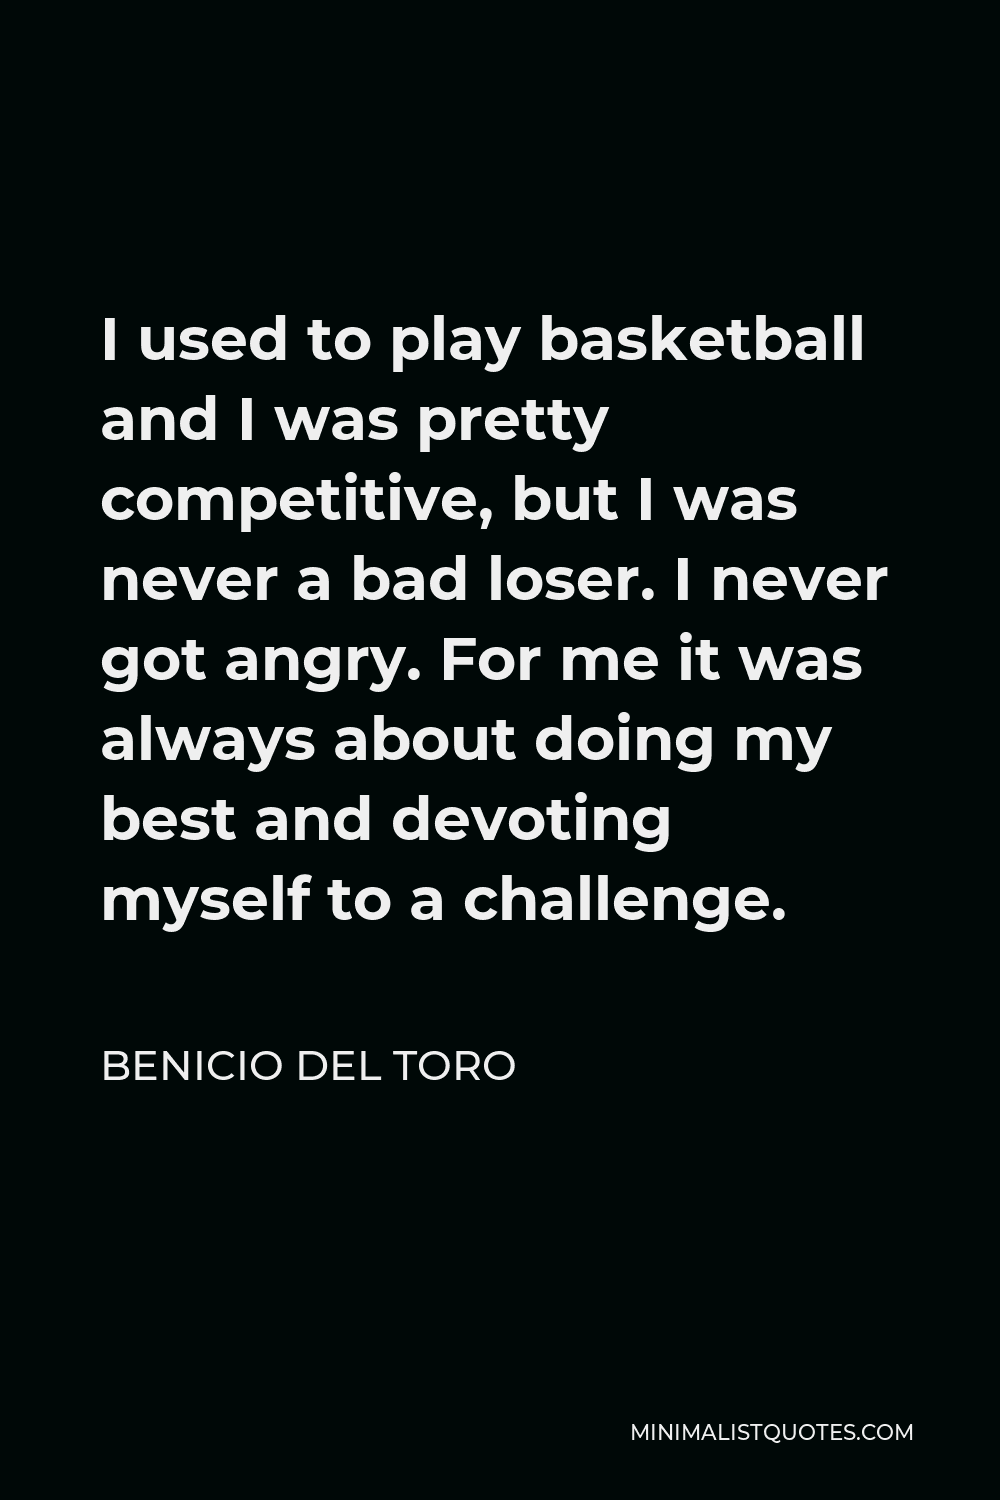 Benicio Del Toro Quote - I used to play basketball and I was pretty competitive, but I was never a bad loser. I never got angry. For me it was always about doing my best and devoting myself to a challenge.